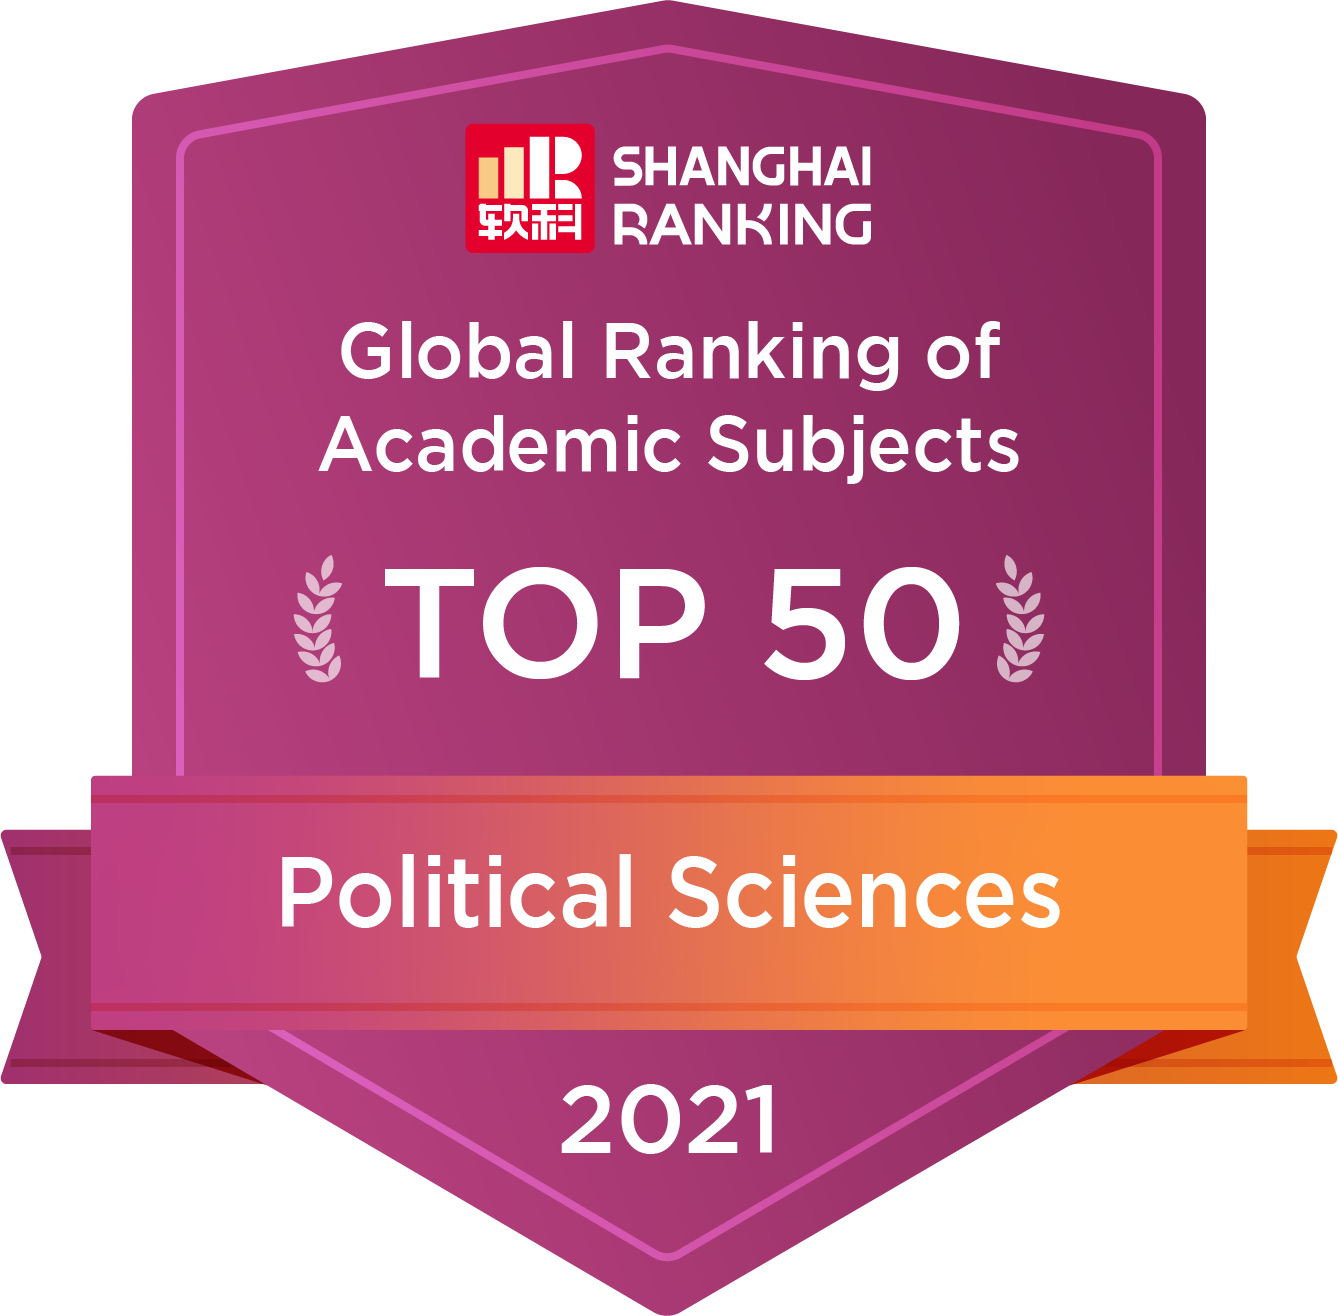 ESSL - Global Ranking of Academic Subjects 2021 - Political Sciences